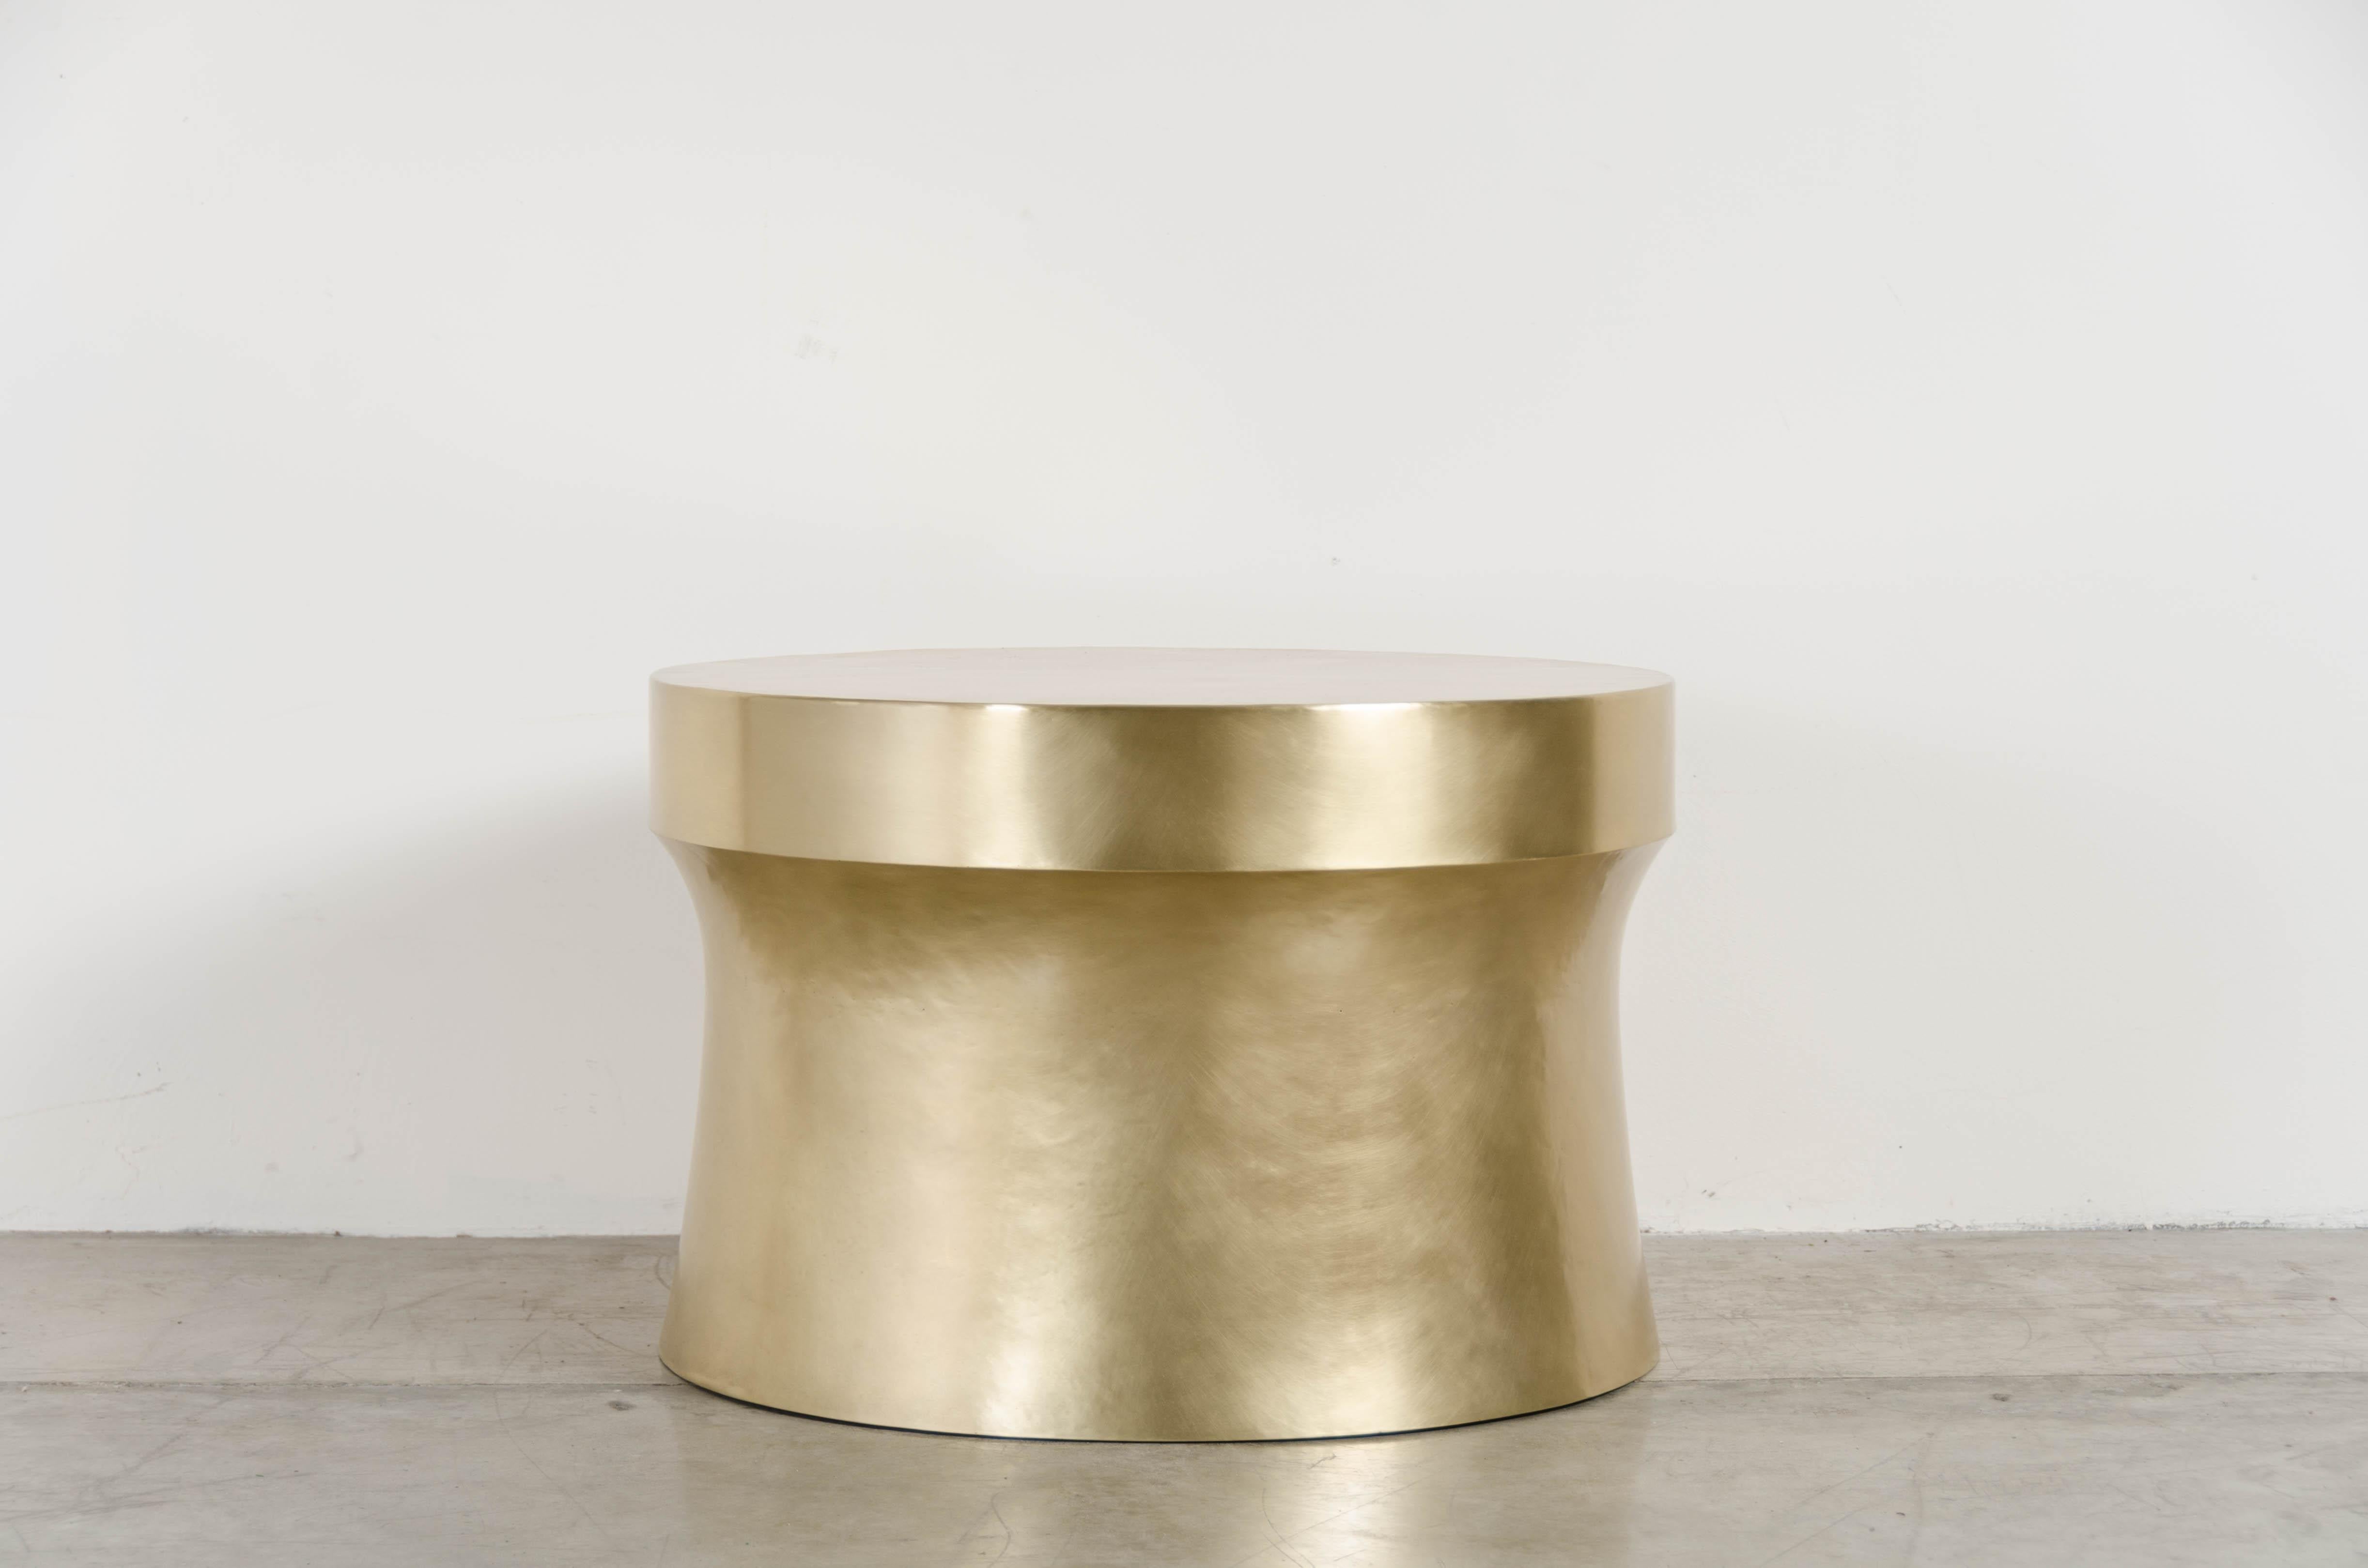 Dong Shan table
Brass
Hand Repousse
Limited edition
Each piece is individually crafted and is unique.

Repousse´ is the traditional art of hand-hammering decorative relief onto sheet metal. The technique originated around 800 BC between Asia